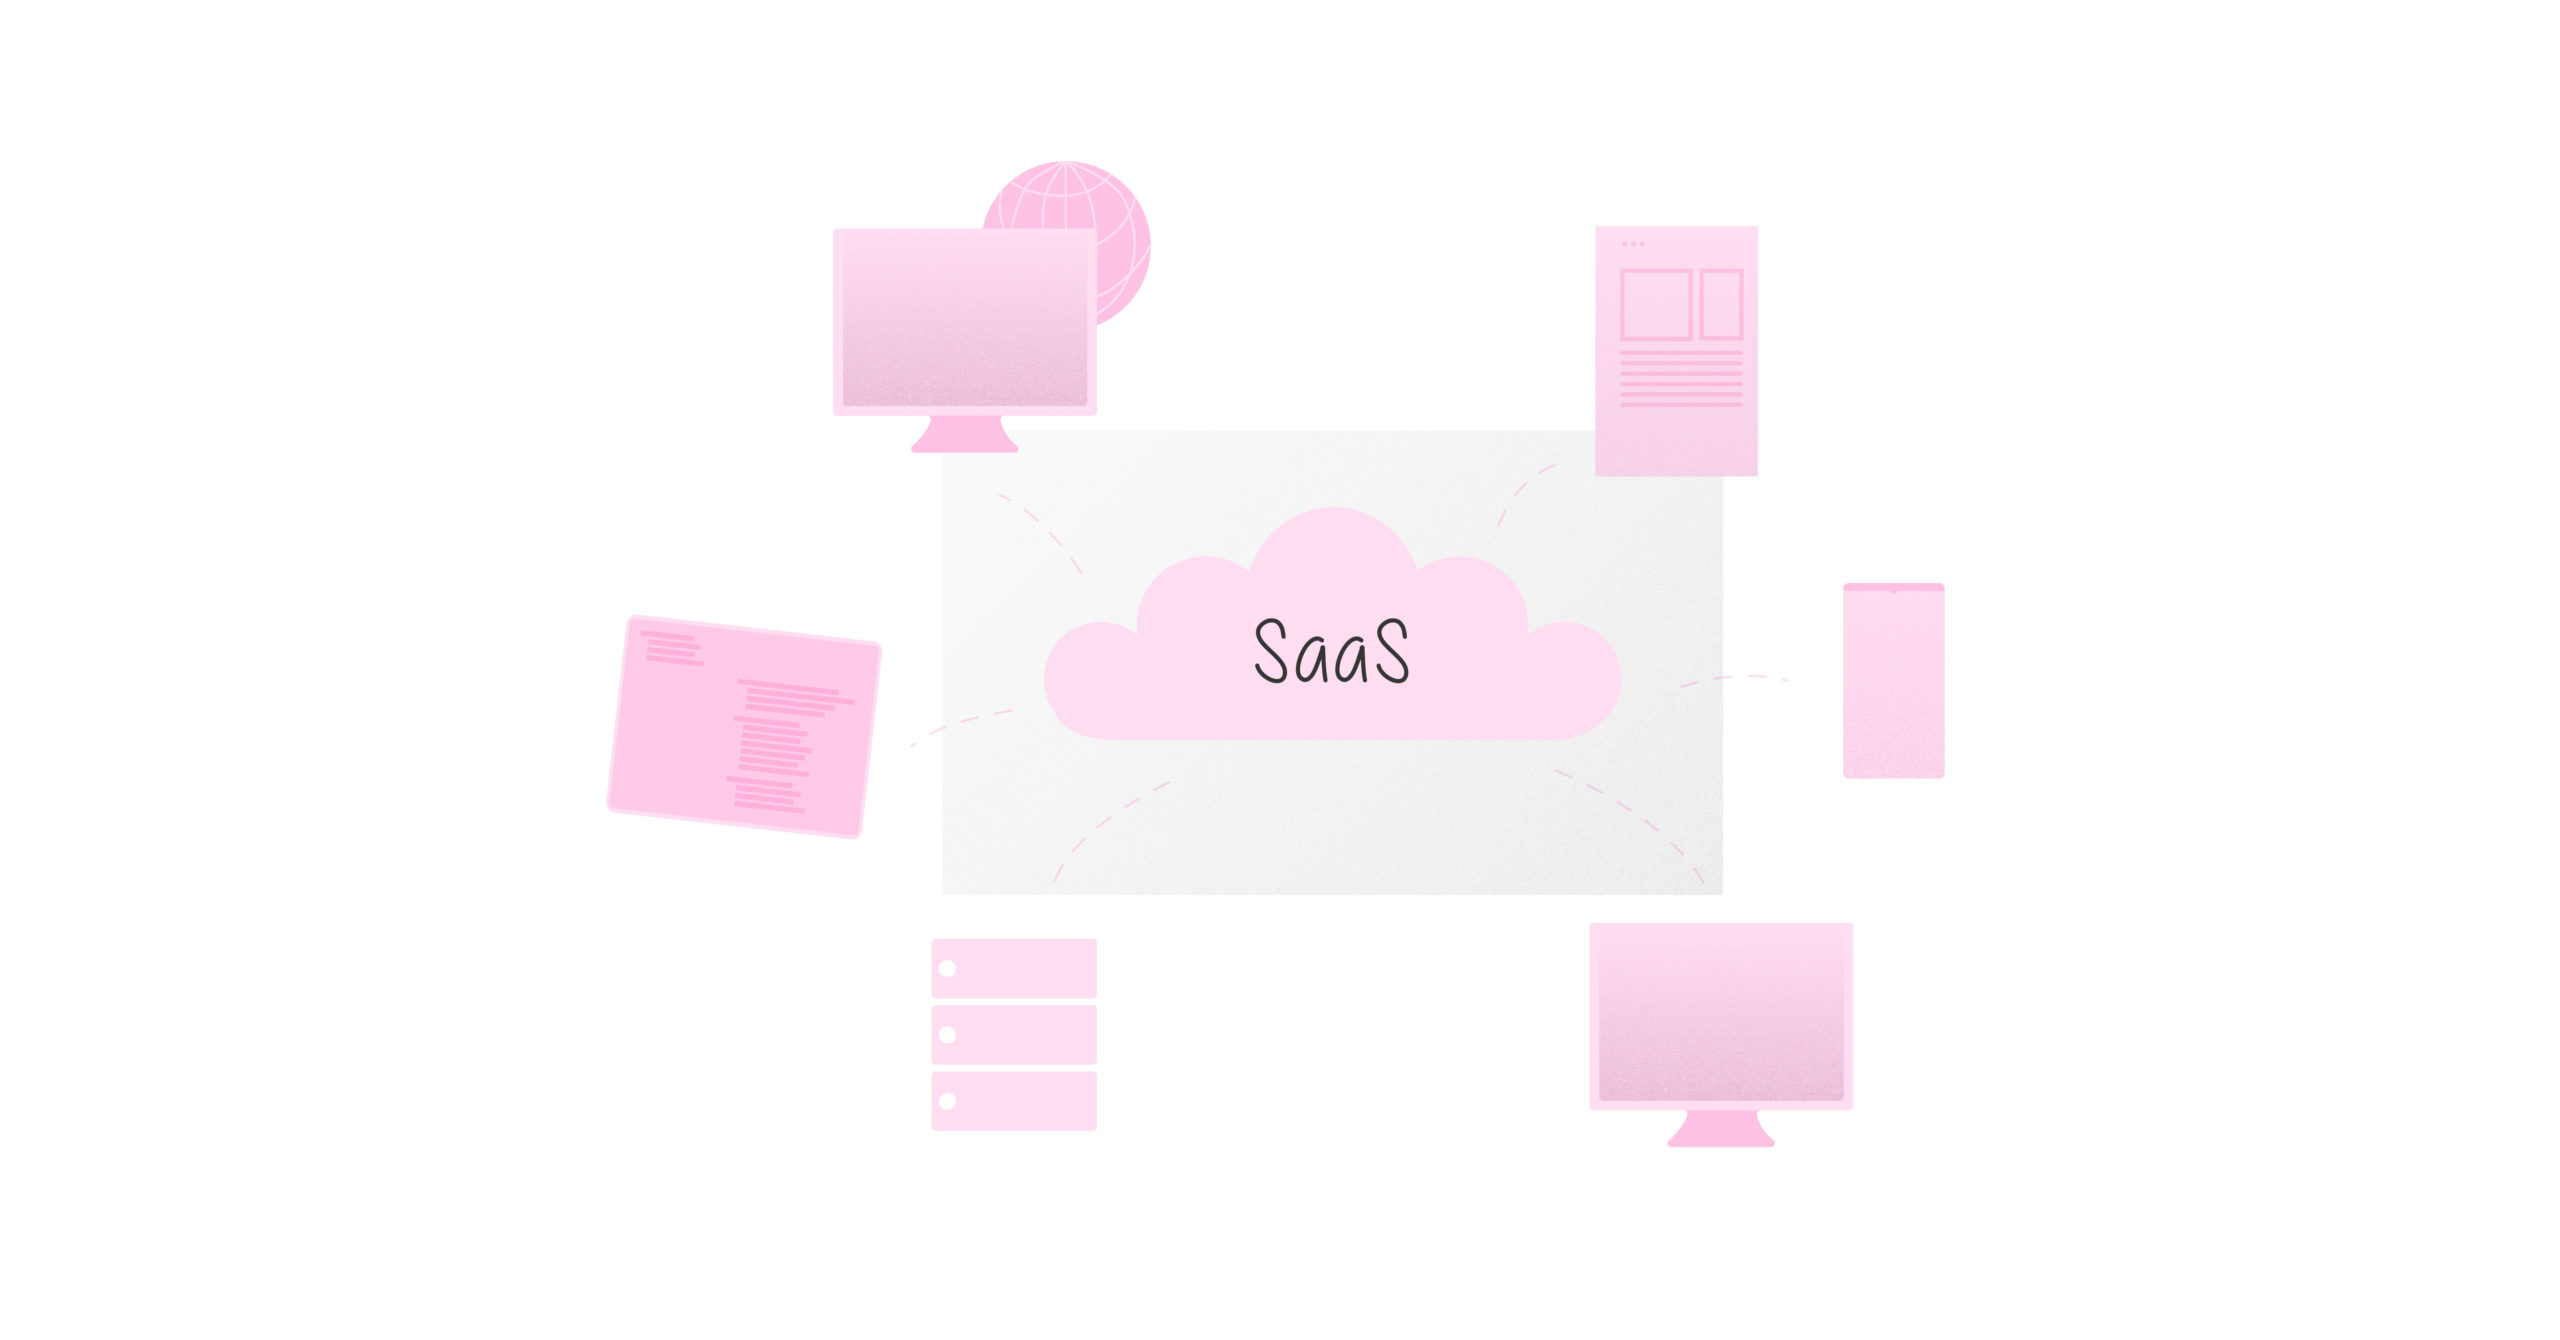 saas-software as a service